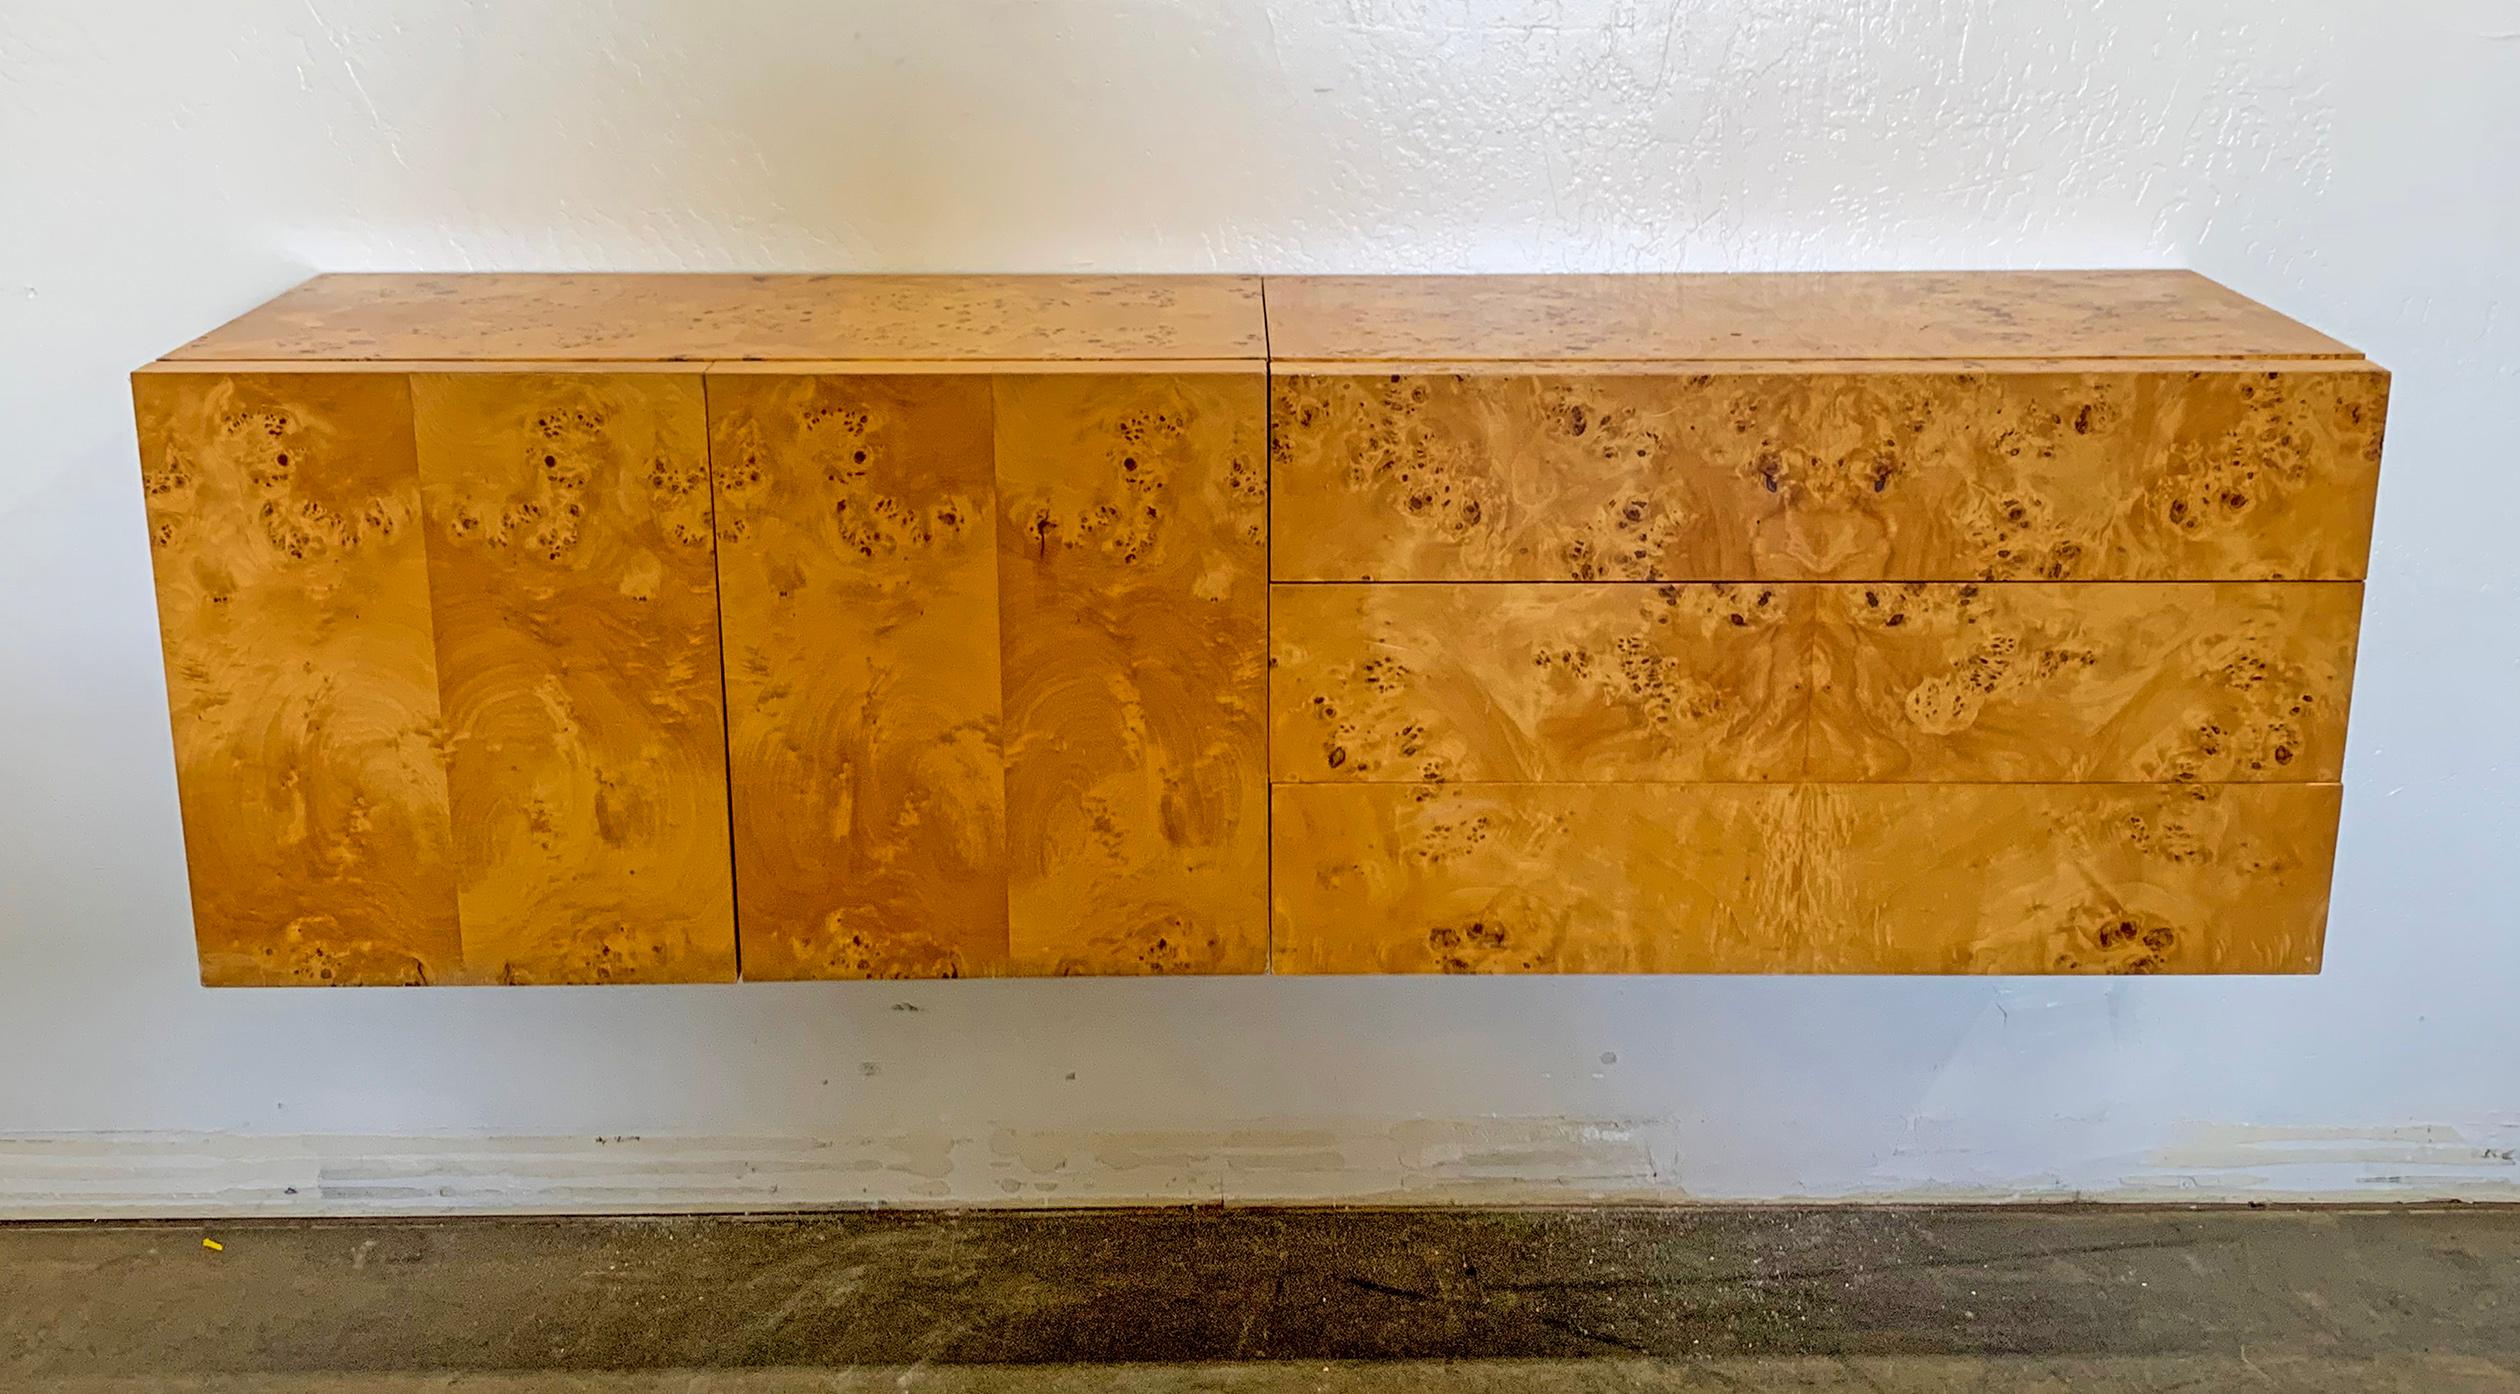 This two-piece Milo Baughman style burl wood credenza is simply divine! Using French cleats, this wall mounted credenza is bound to bring a touch of warmth and modernism to any environment. The olive burl grain is wrapped around the top and sides to